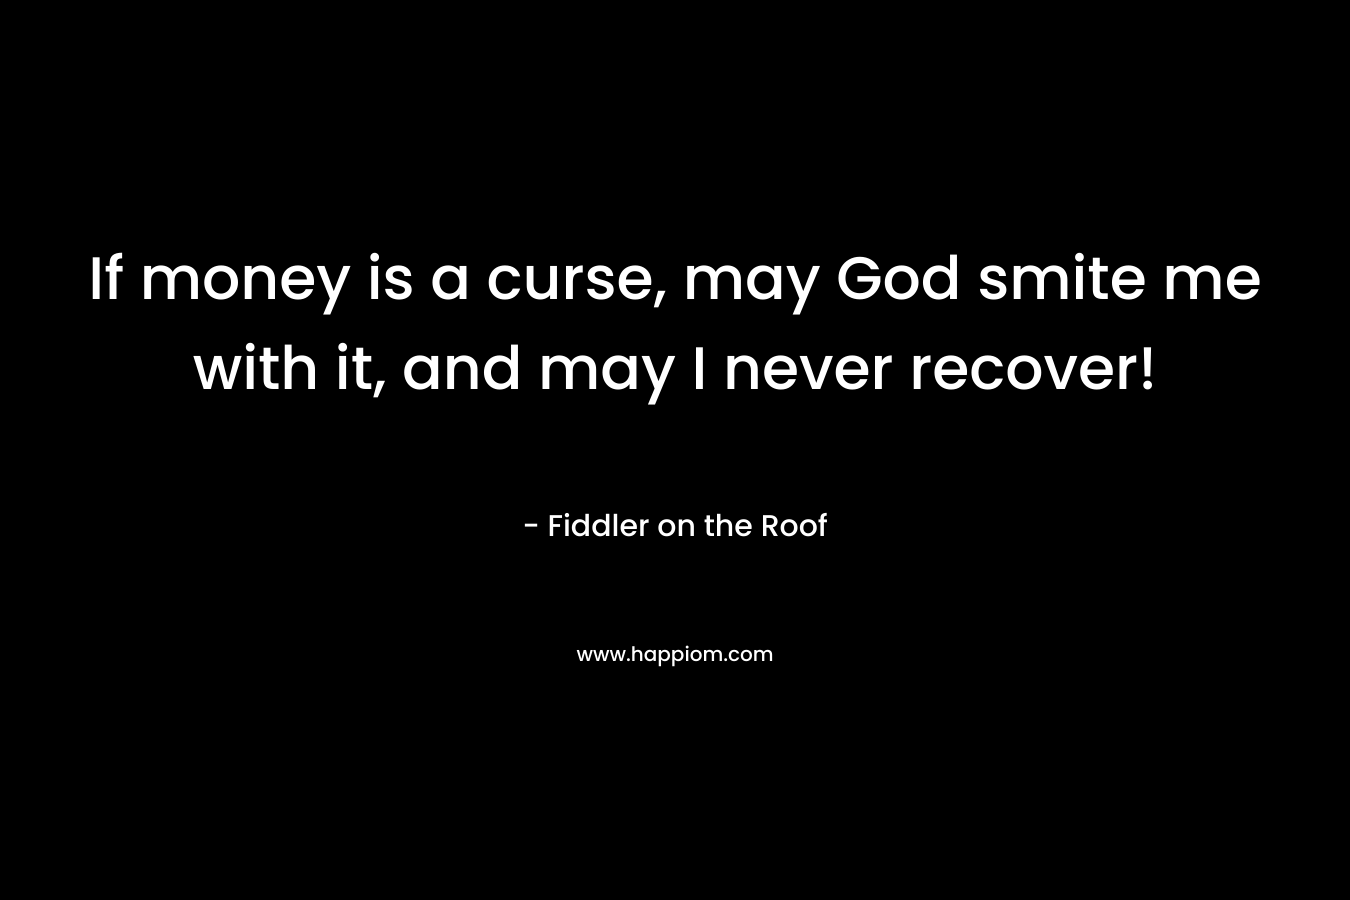 If money is a curse, may God smite me with it, and may I never recover!